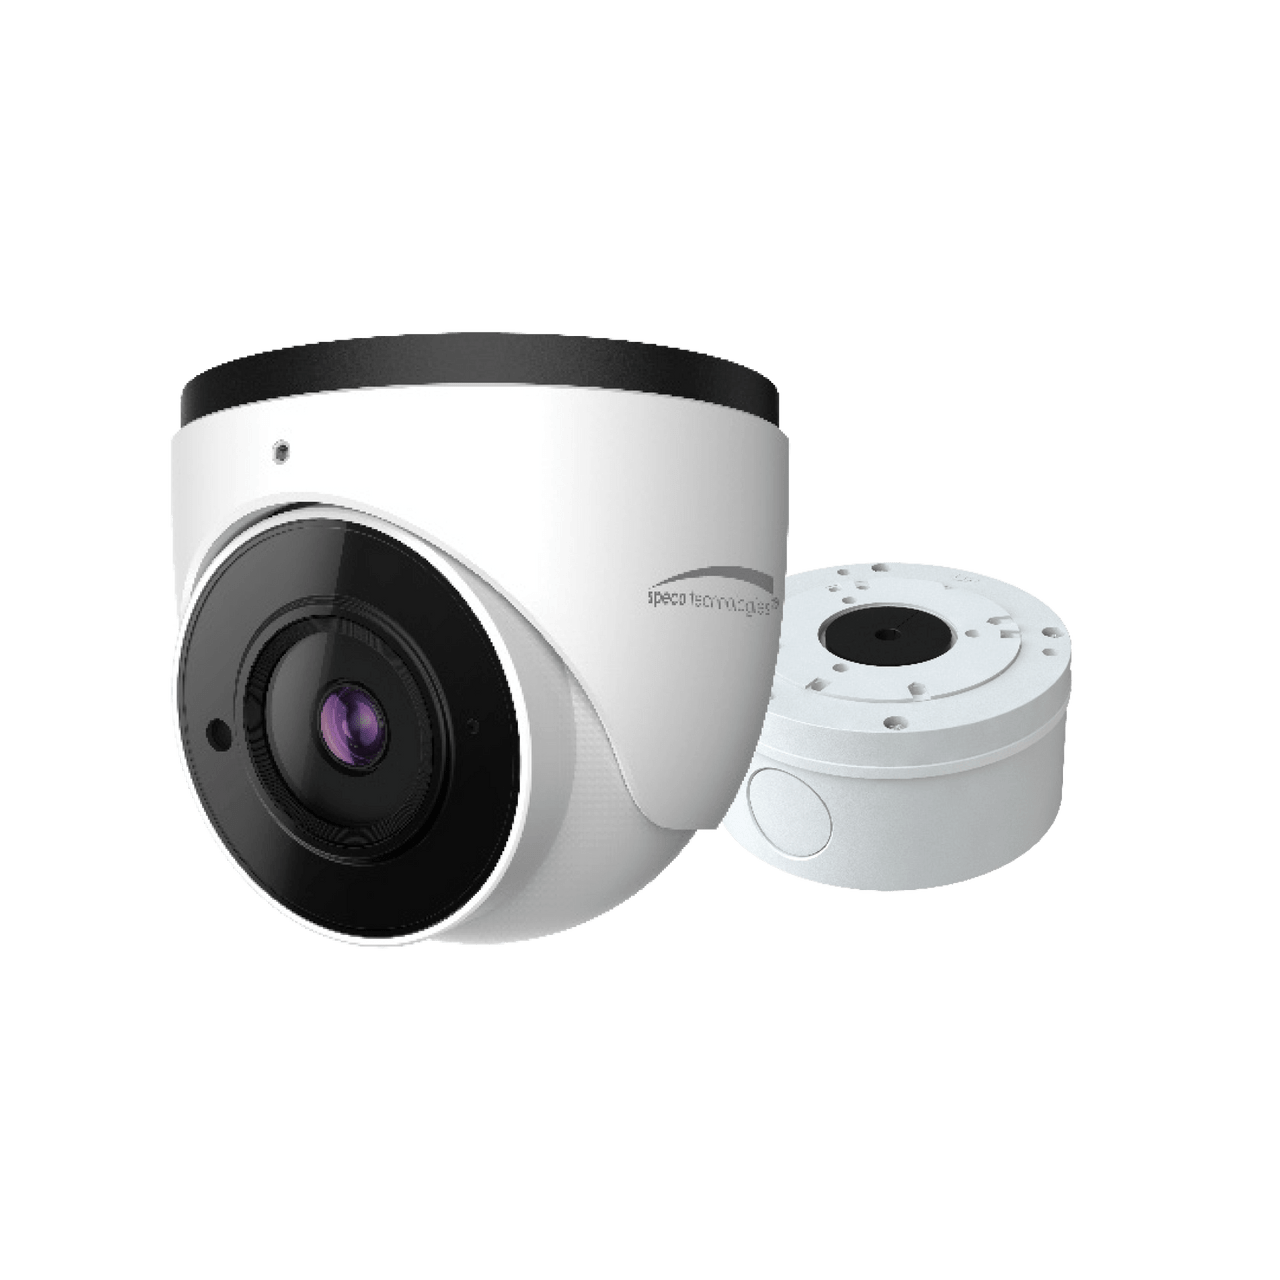 Speco Technologies O8VD1 4K H.265 IP Dome Camera with IR, 2.8mm fixed lens, Junction Box, White Housing (SPE-O8VD1)